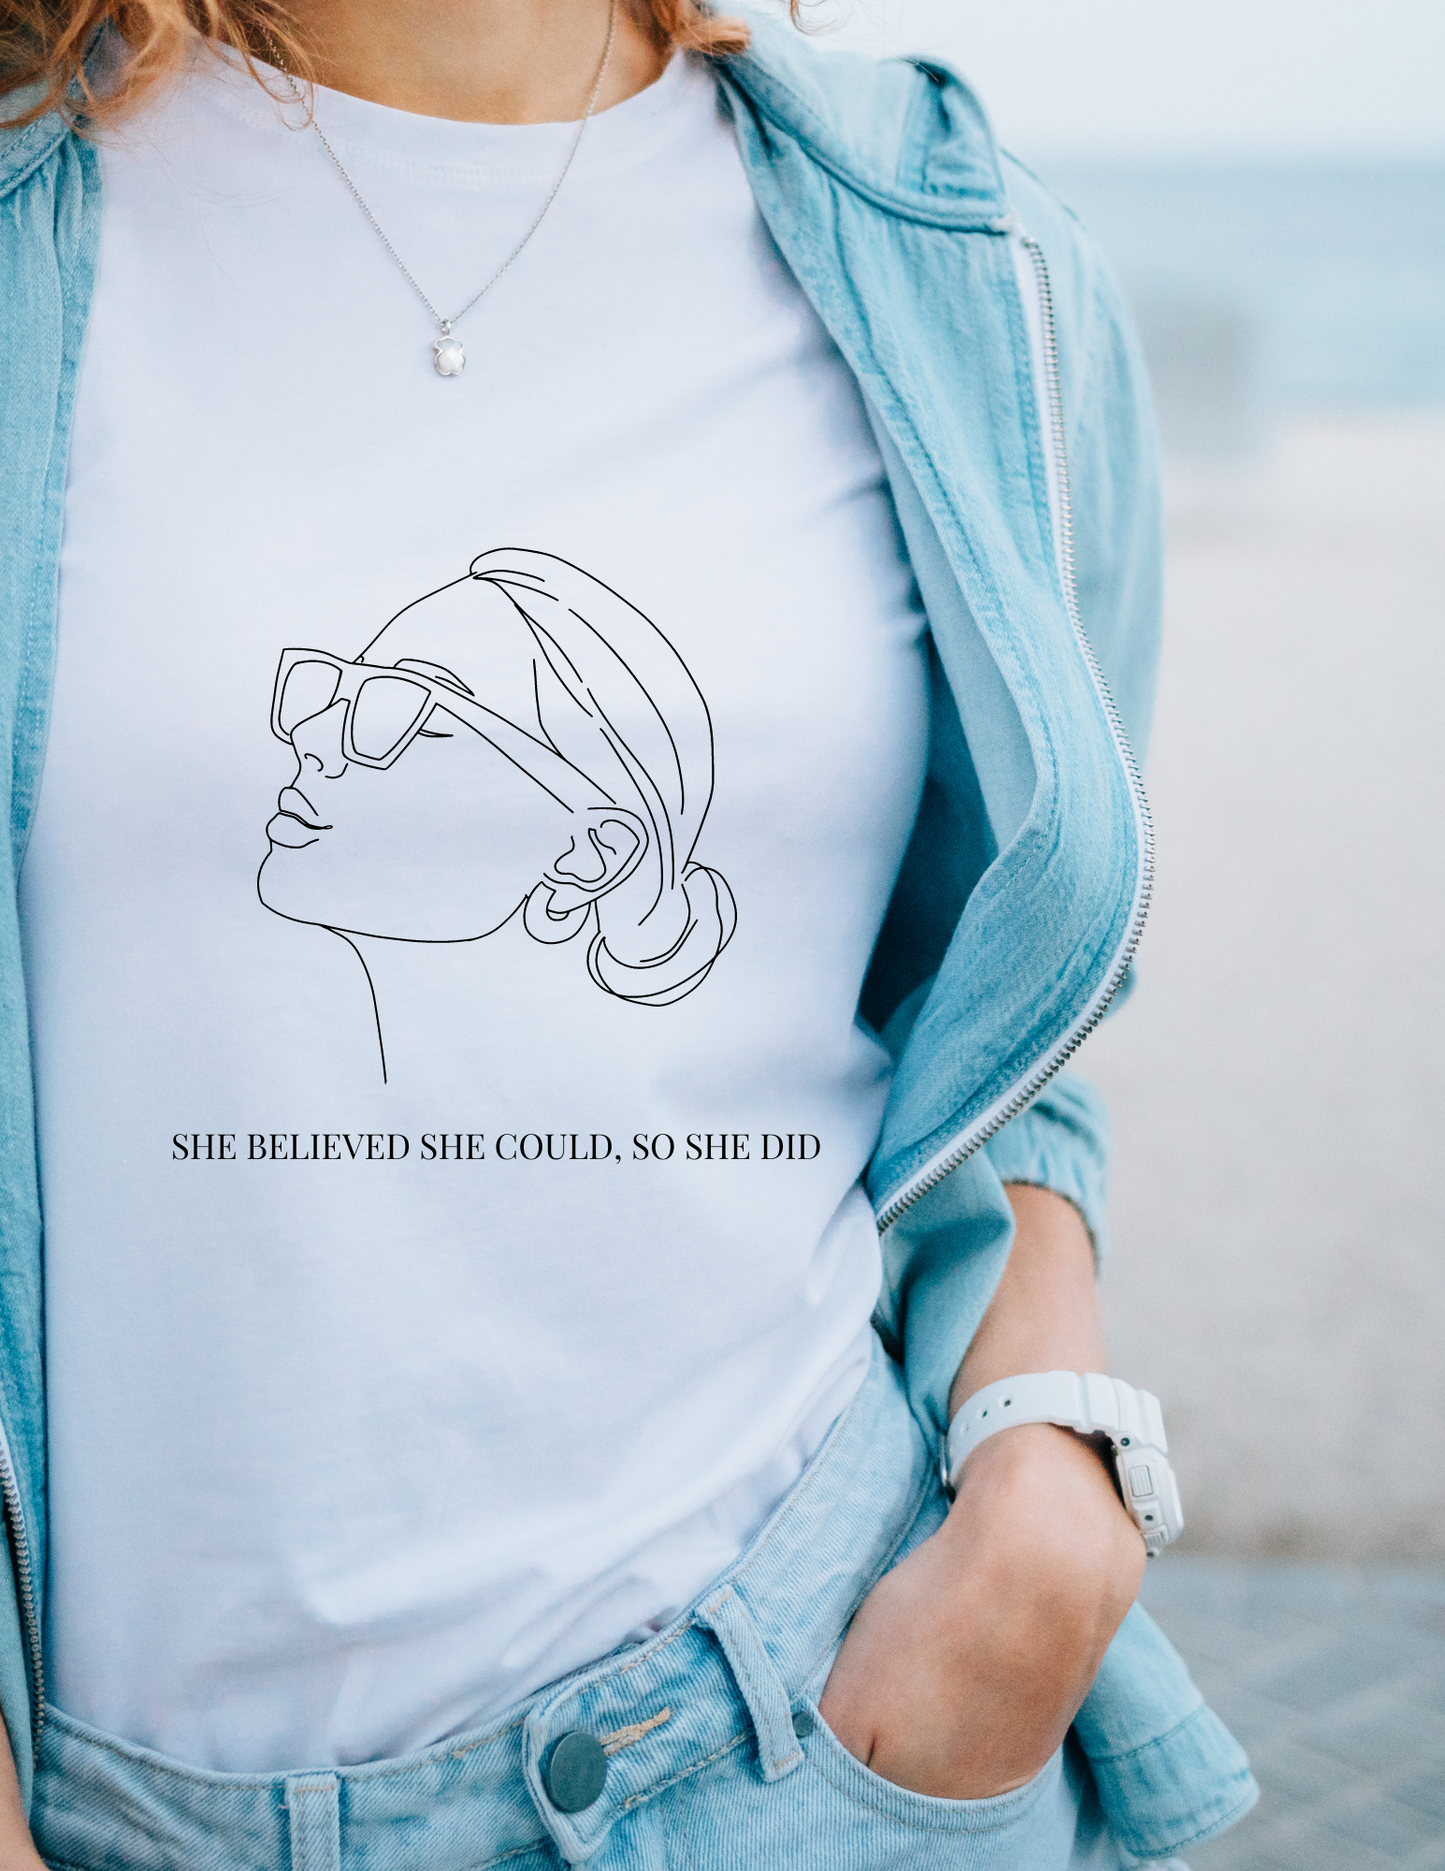 A women's upper body wearing a white t-shirt with a black outline of a women wearing sunglasses with her hair in a bun and earrings that has a quote she believed she could, so she did with a blue jacket and jeans.